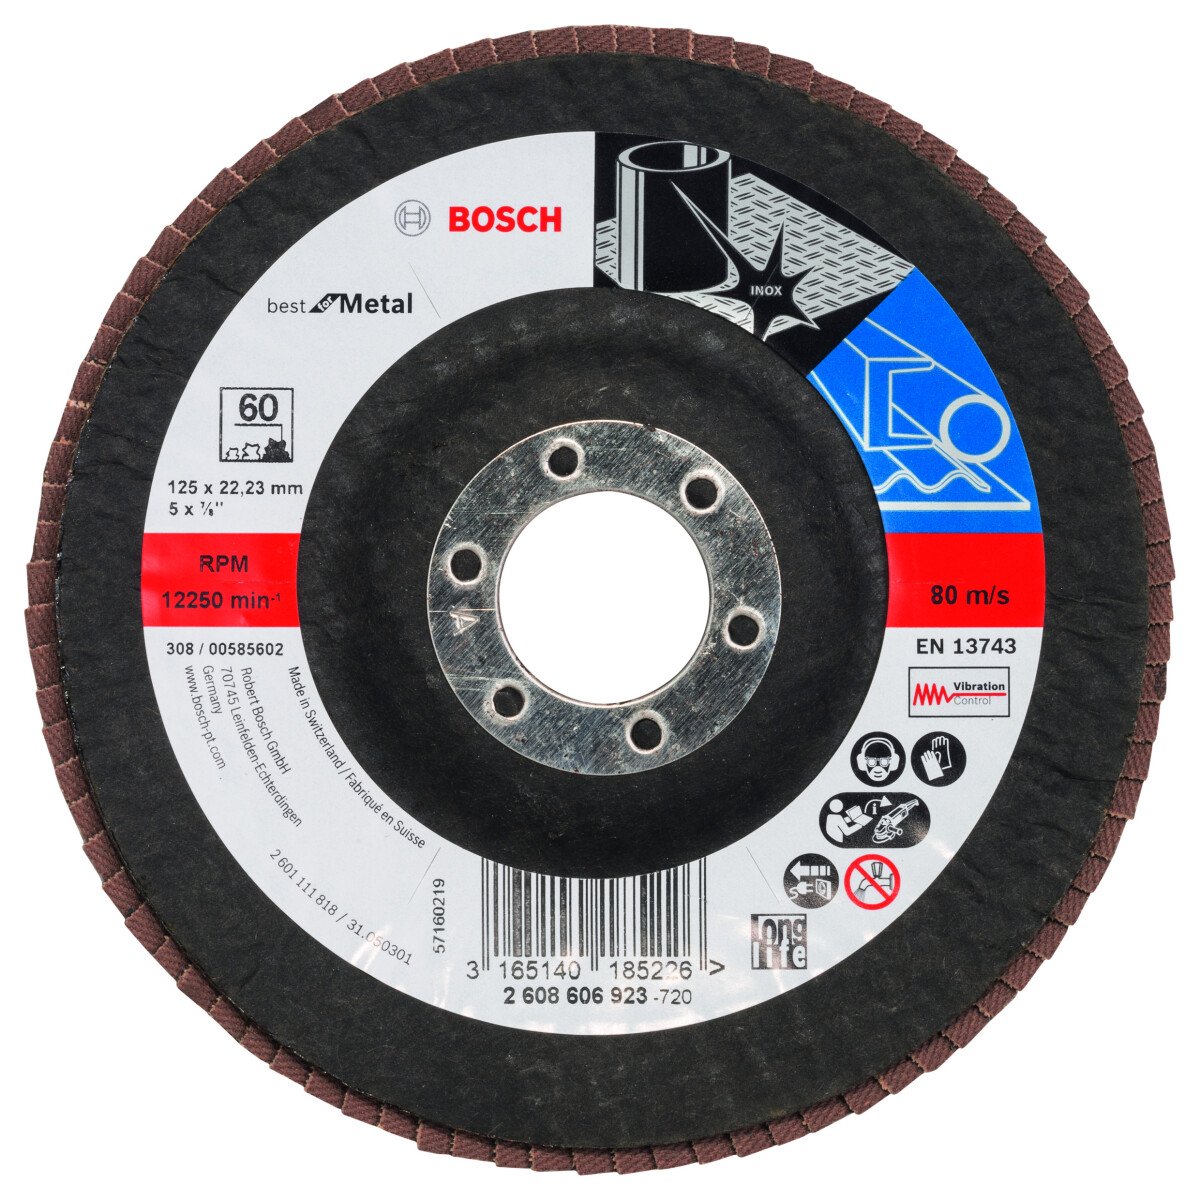 Bosch 2608606923 Flap Sanding discs for Angle Grinders . 125x22 G60